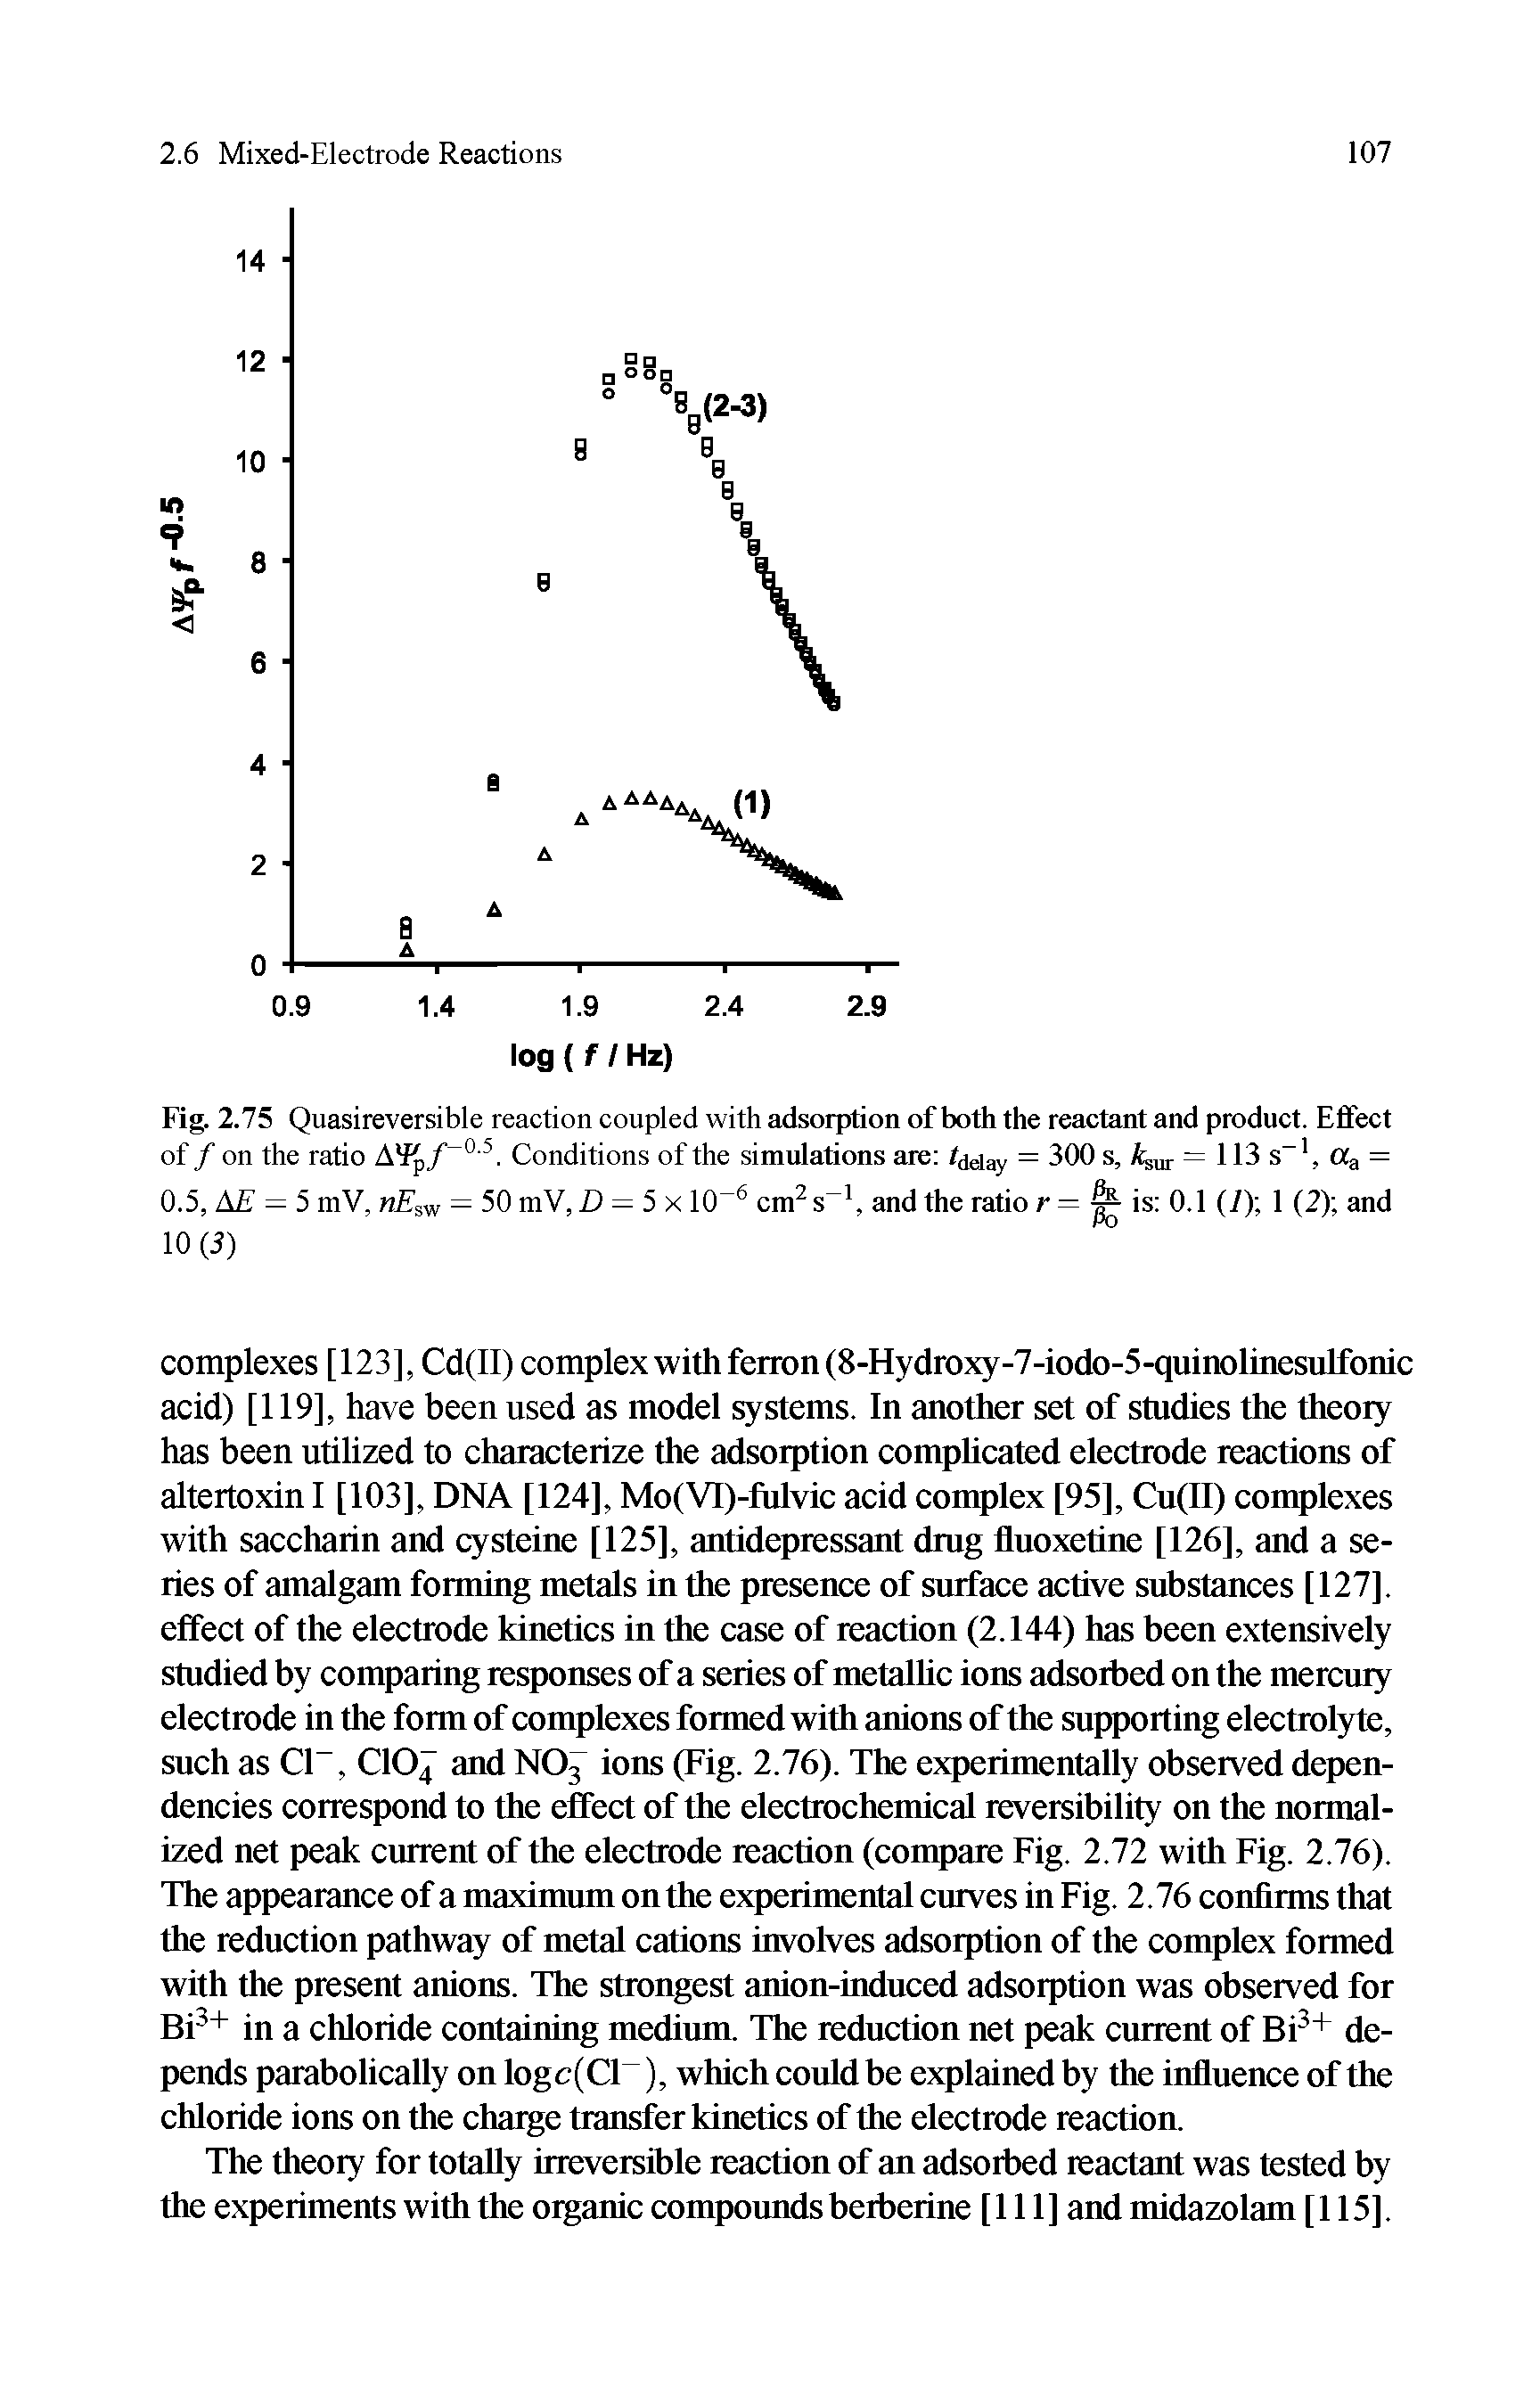 Fig. 2.75 Quasireversible reaction coupled with adsorption of both the reactant and product. Effect of/ on the ratio Conditions of the simulations are /dday = 300 s, = 113 s , (X =...